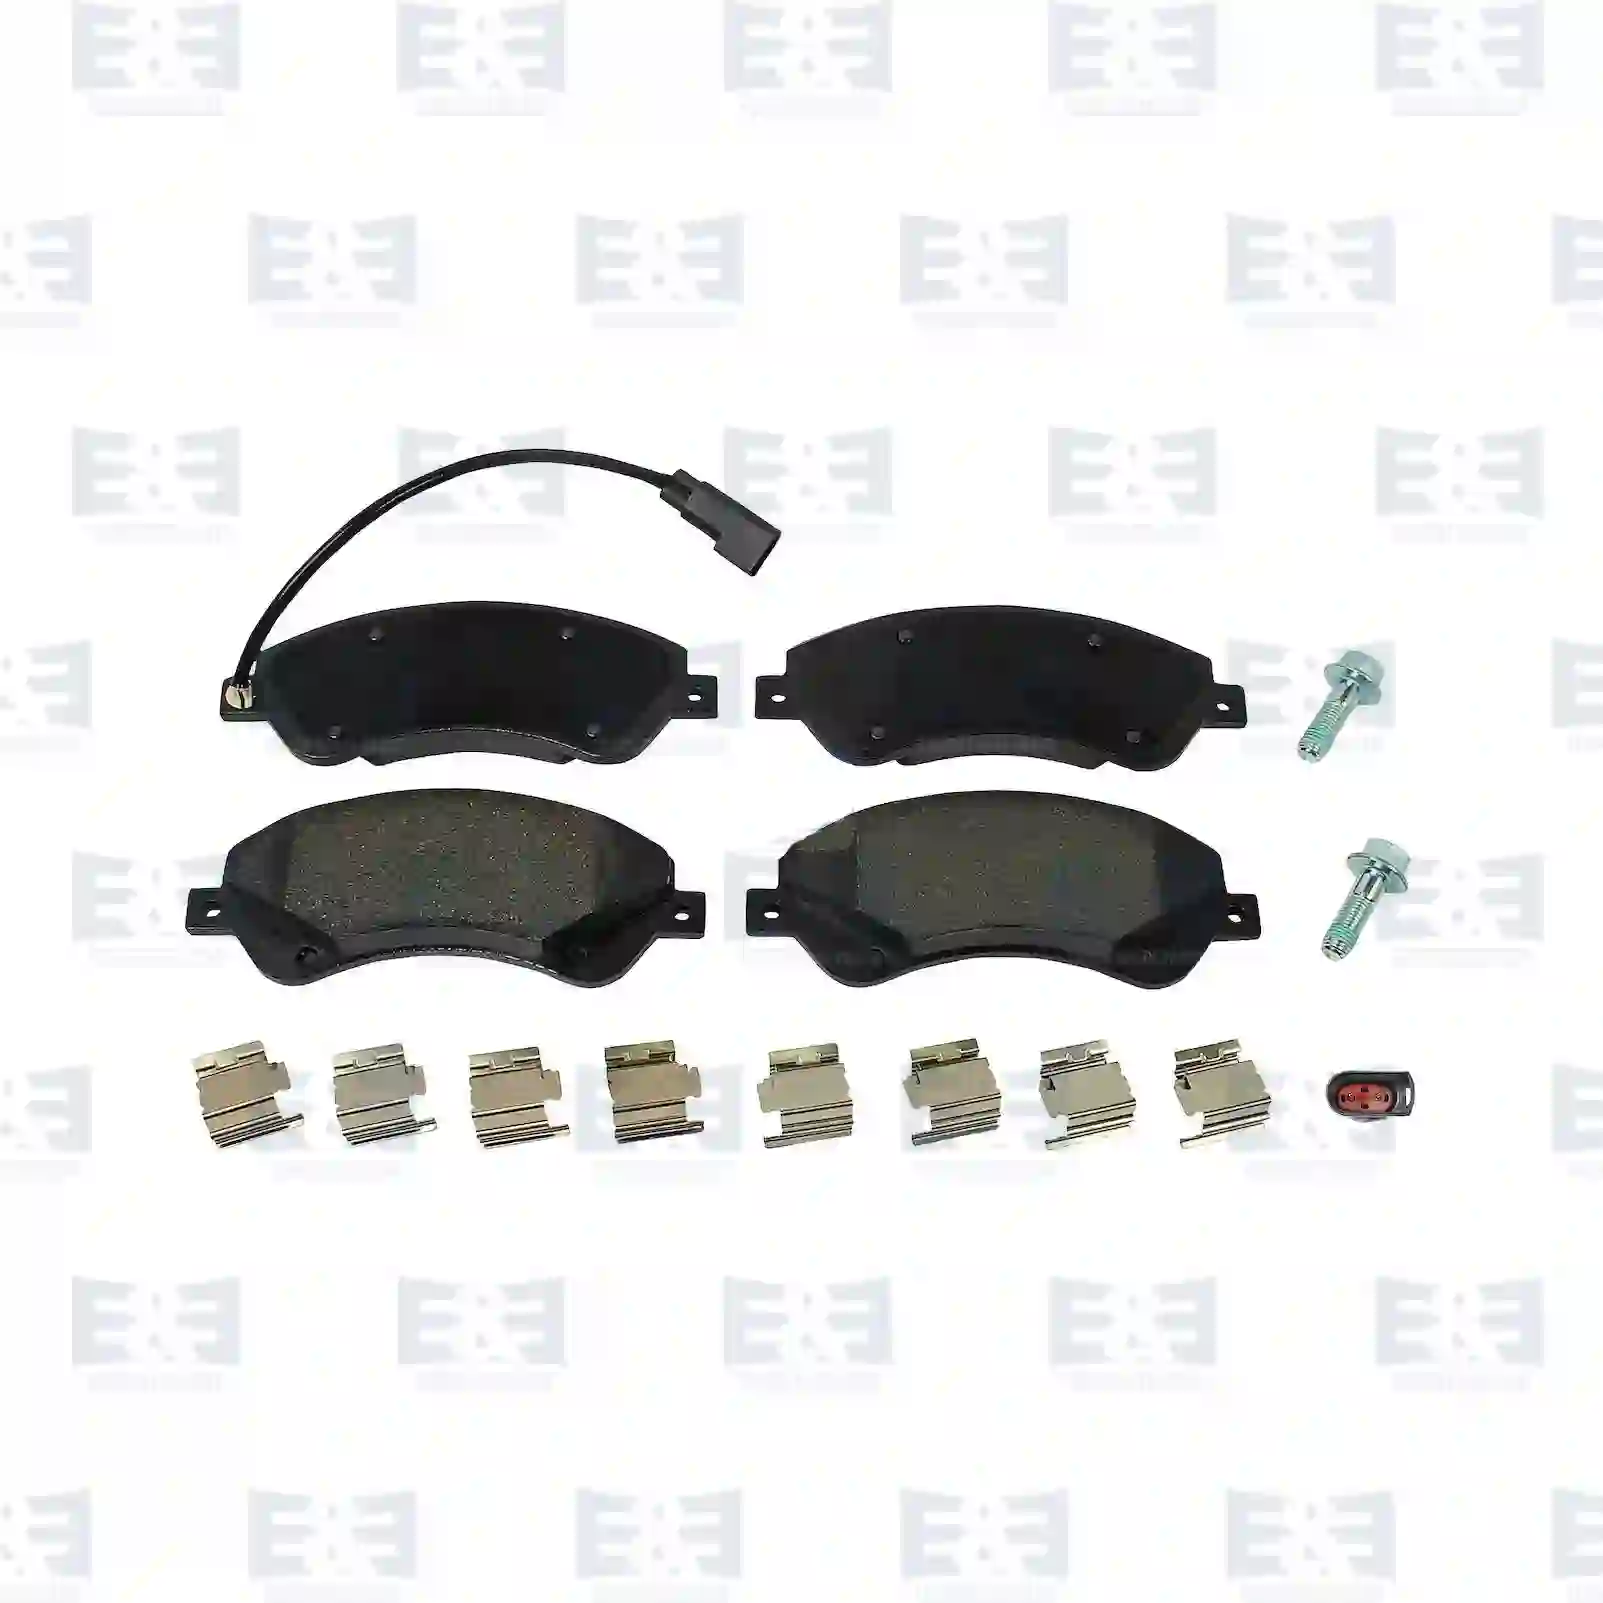 Disc brake pad kit, with accessories, 2E2296619, 1371403, 1433954, 1534428, 1554523, 1560023, 1721086, 1824347, 6C11-2K021-BC, ME6C1J-2K021-BA, ME6C1J-2K021-BB ||  2E2296619 E&E Truck Spare Parts | Truck Spare Parts, Auotomotive Spare Parts Disc brake pad kit, with accessories, 2E2296619, 1371403, 1433954, 1534428, 1554523, 1560023, 1721086, 1824347, 6C11-2K021-BC, ME6C1J-2K021-BA, ME6C1J-2K021-BB ||  2E2296619 E&E Truck Spare Parts | Truck Spare Parts, Auotomotive Spare Parts